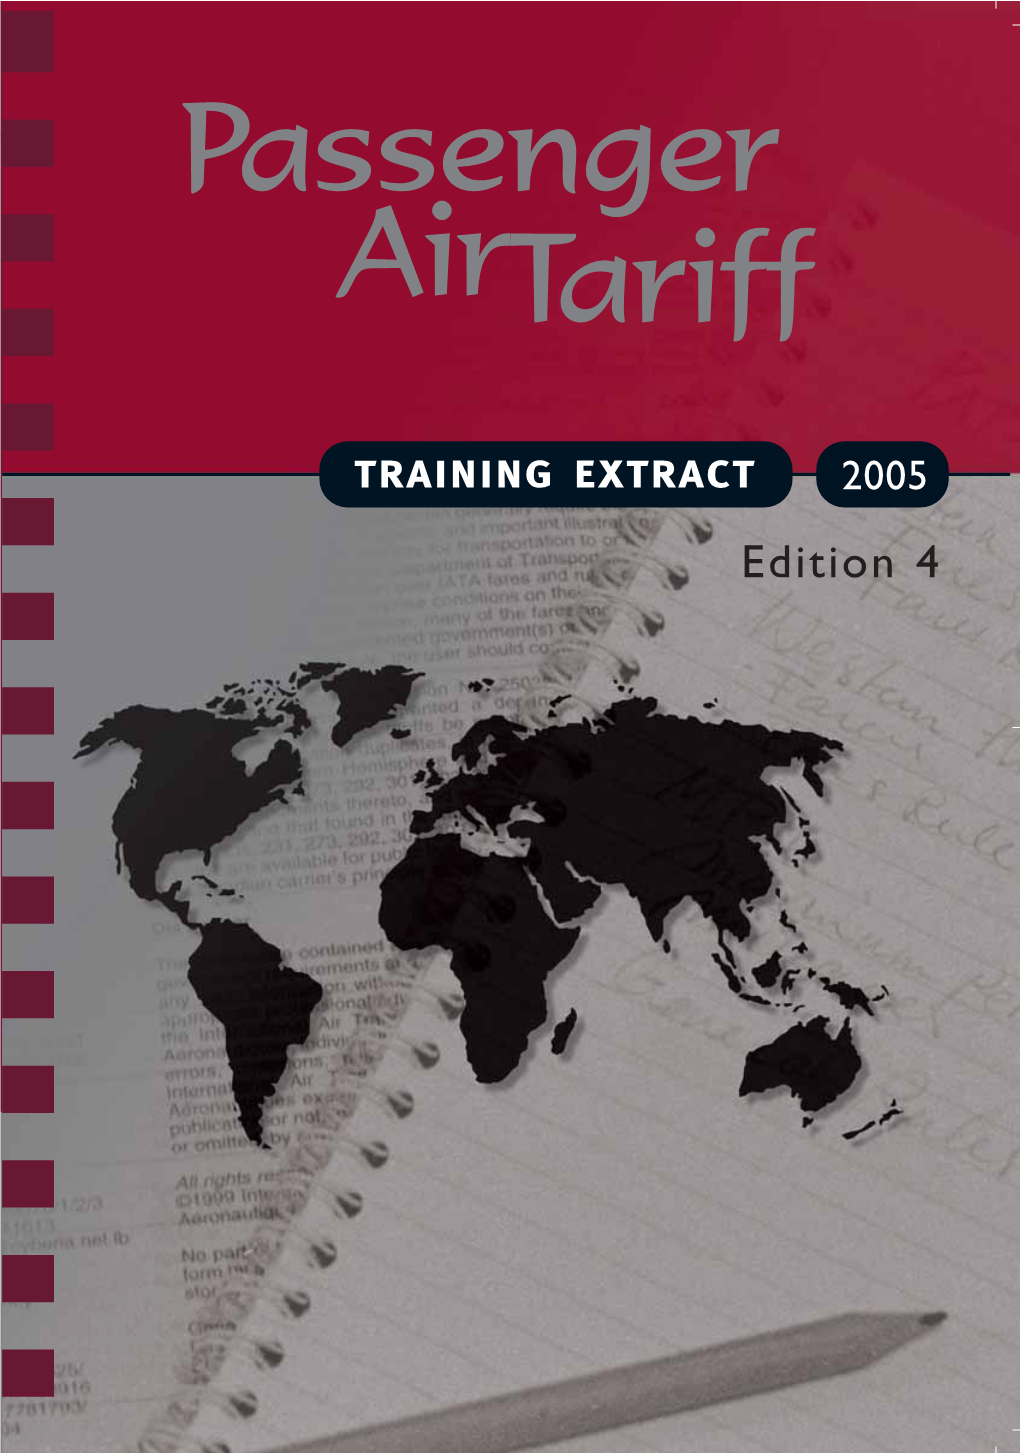 Training Extract 2005 Edition 4 General Introduction